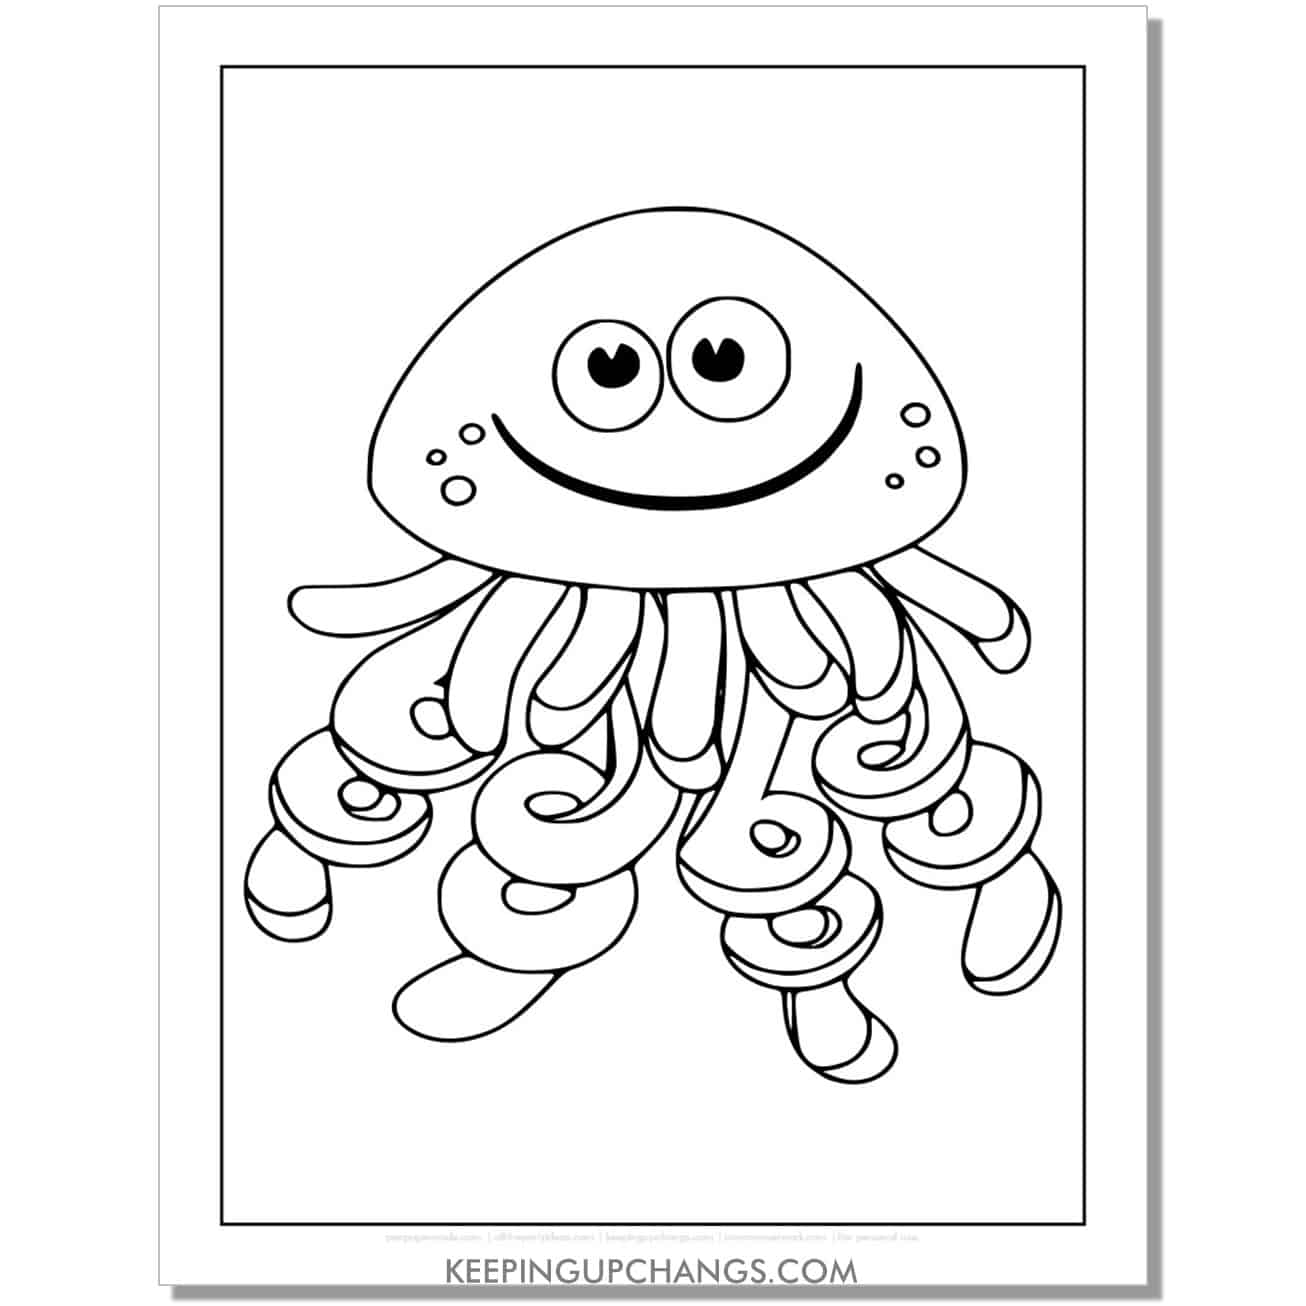 free happy jellyfish coloring page, sheet for preschool, toddlers.